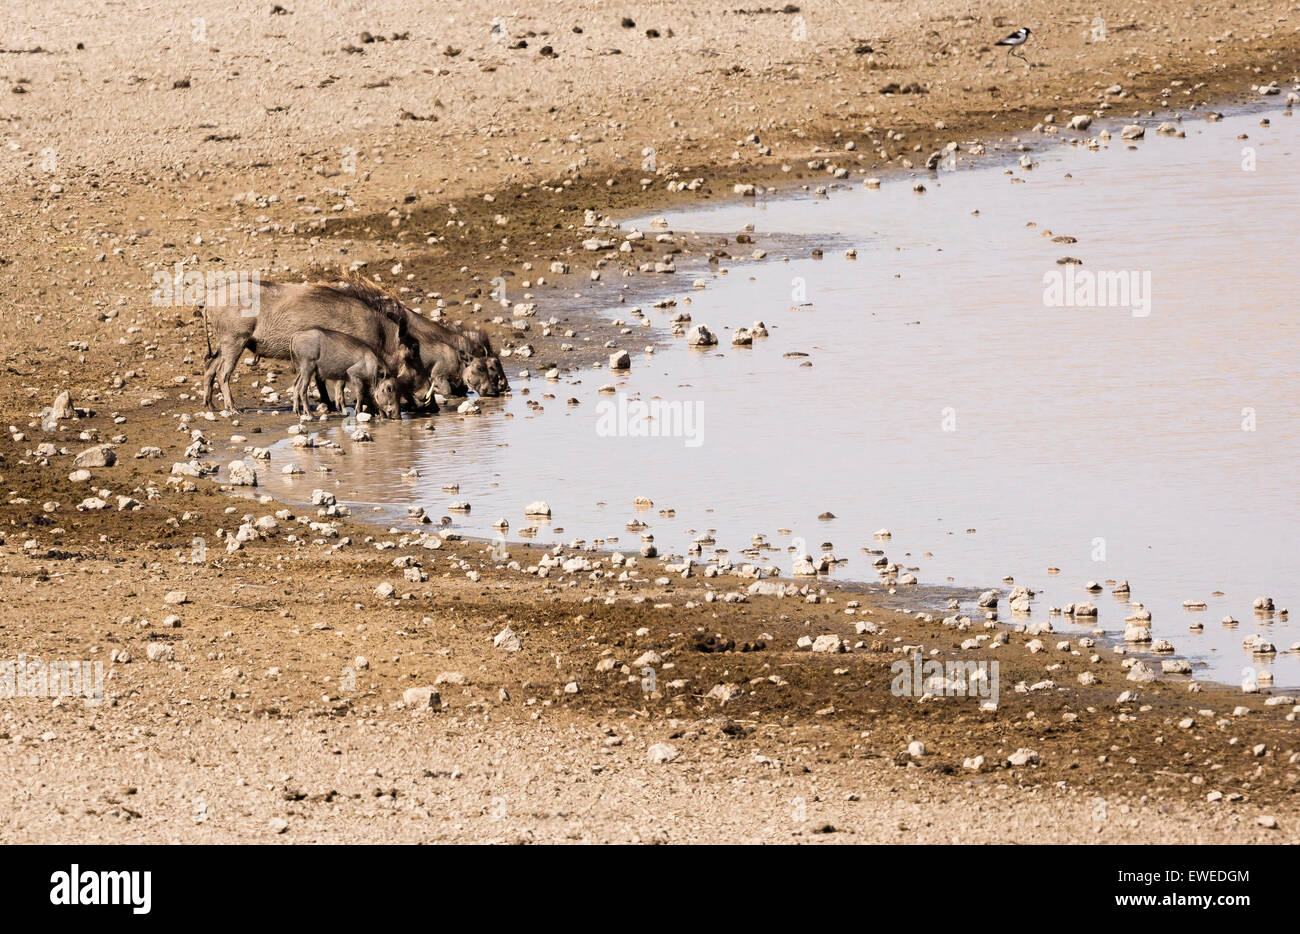 A family of warthogs (Phachocoerus africanus) quench their thirst at a water hole in the Serengeti Tanzania Stock Photo